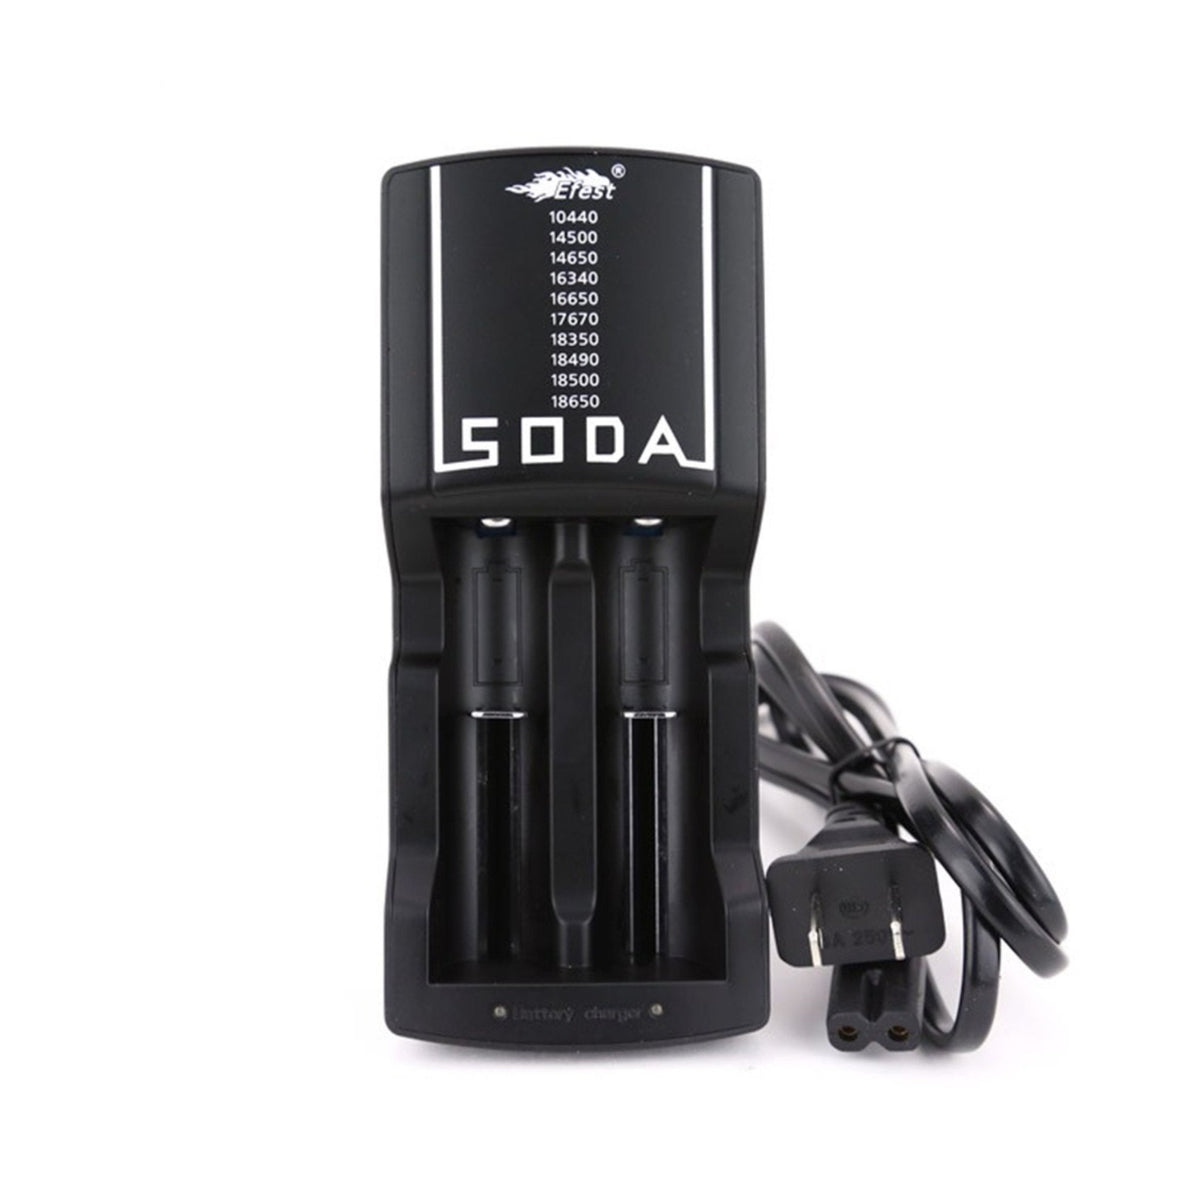 SODA Charger by Efest